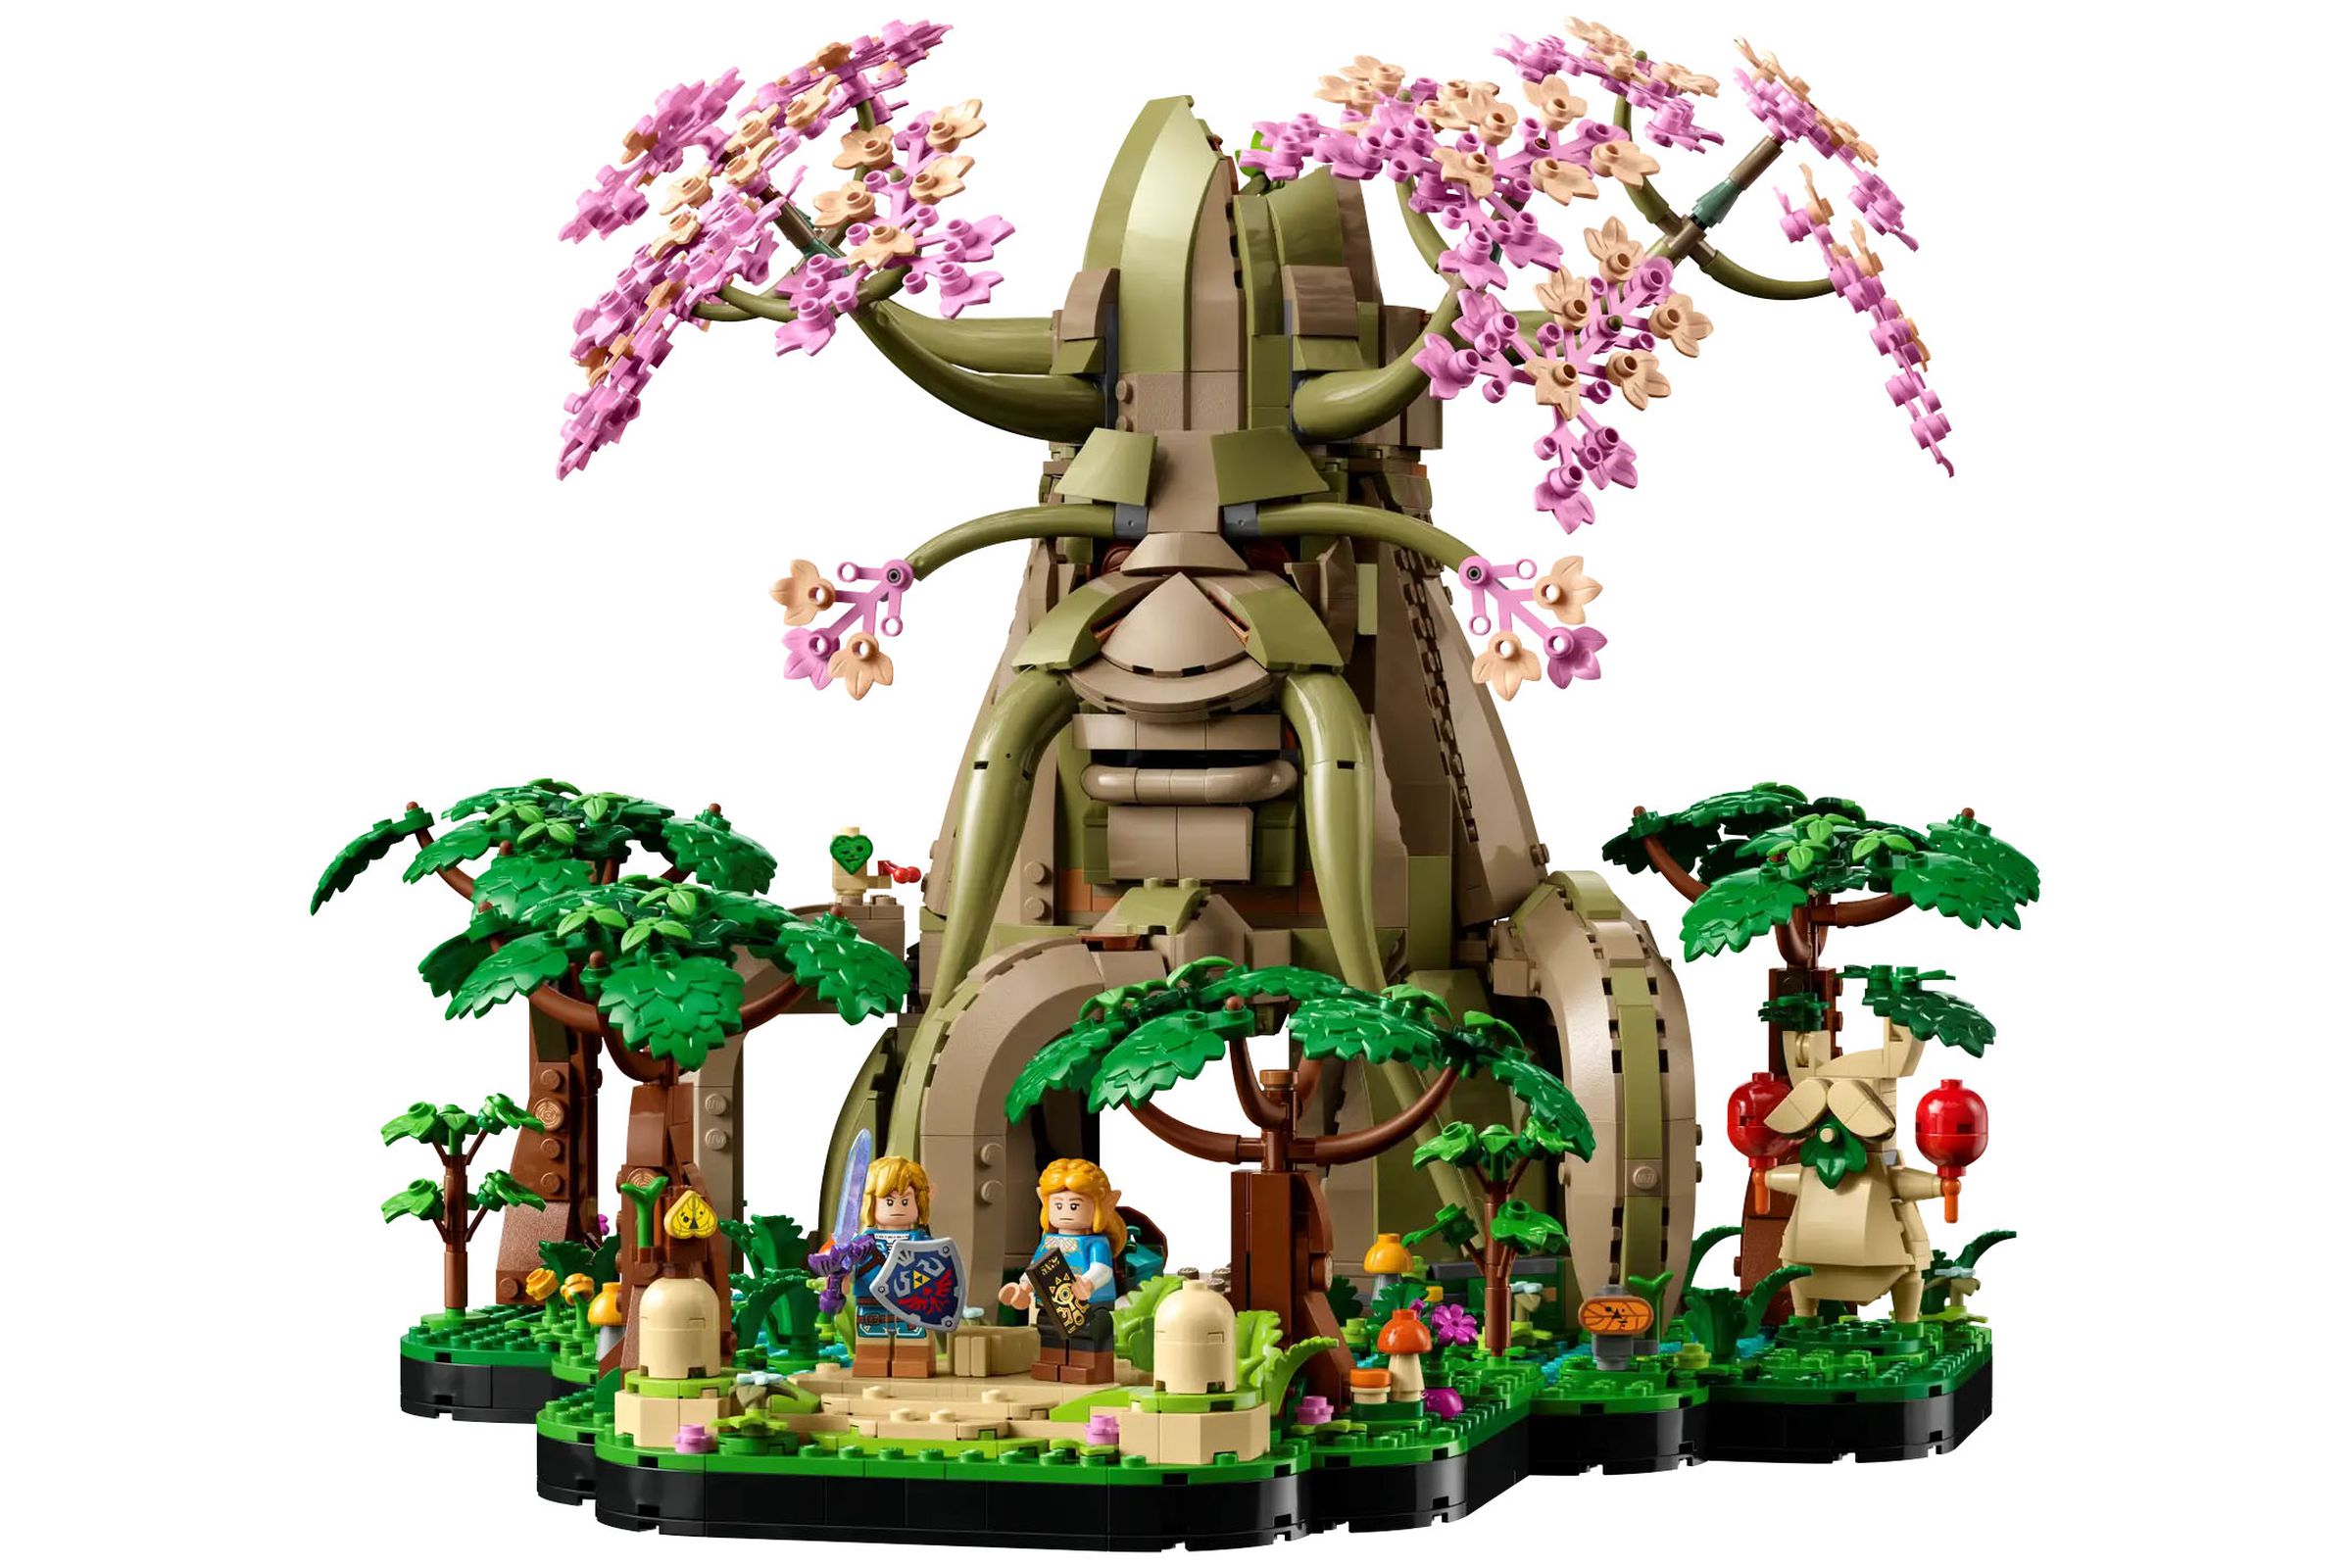 The Great Deku Tree from Breath of the Wild in Lego form.